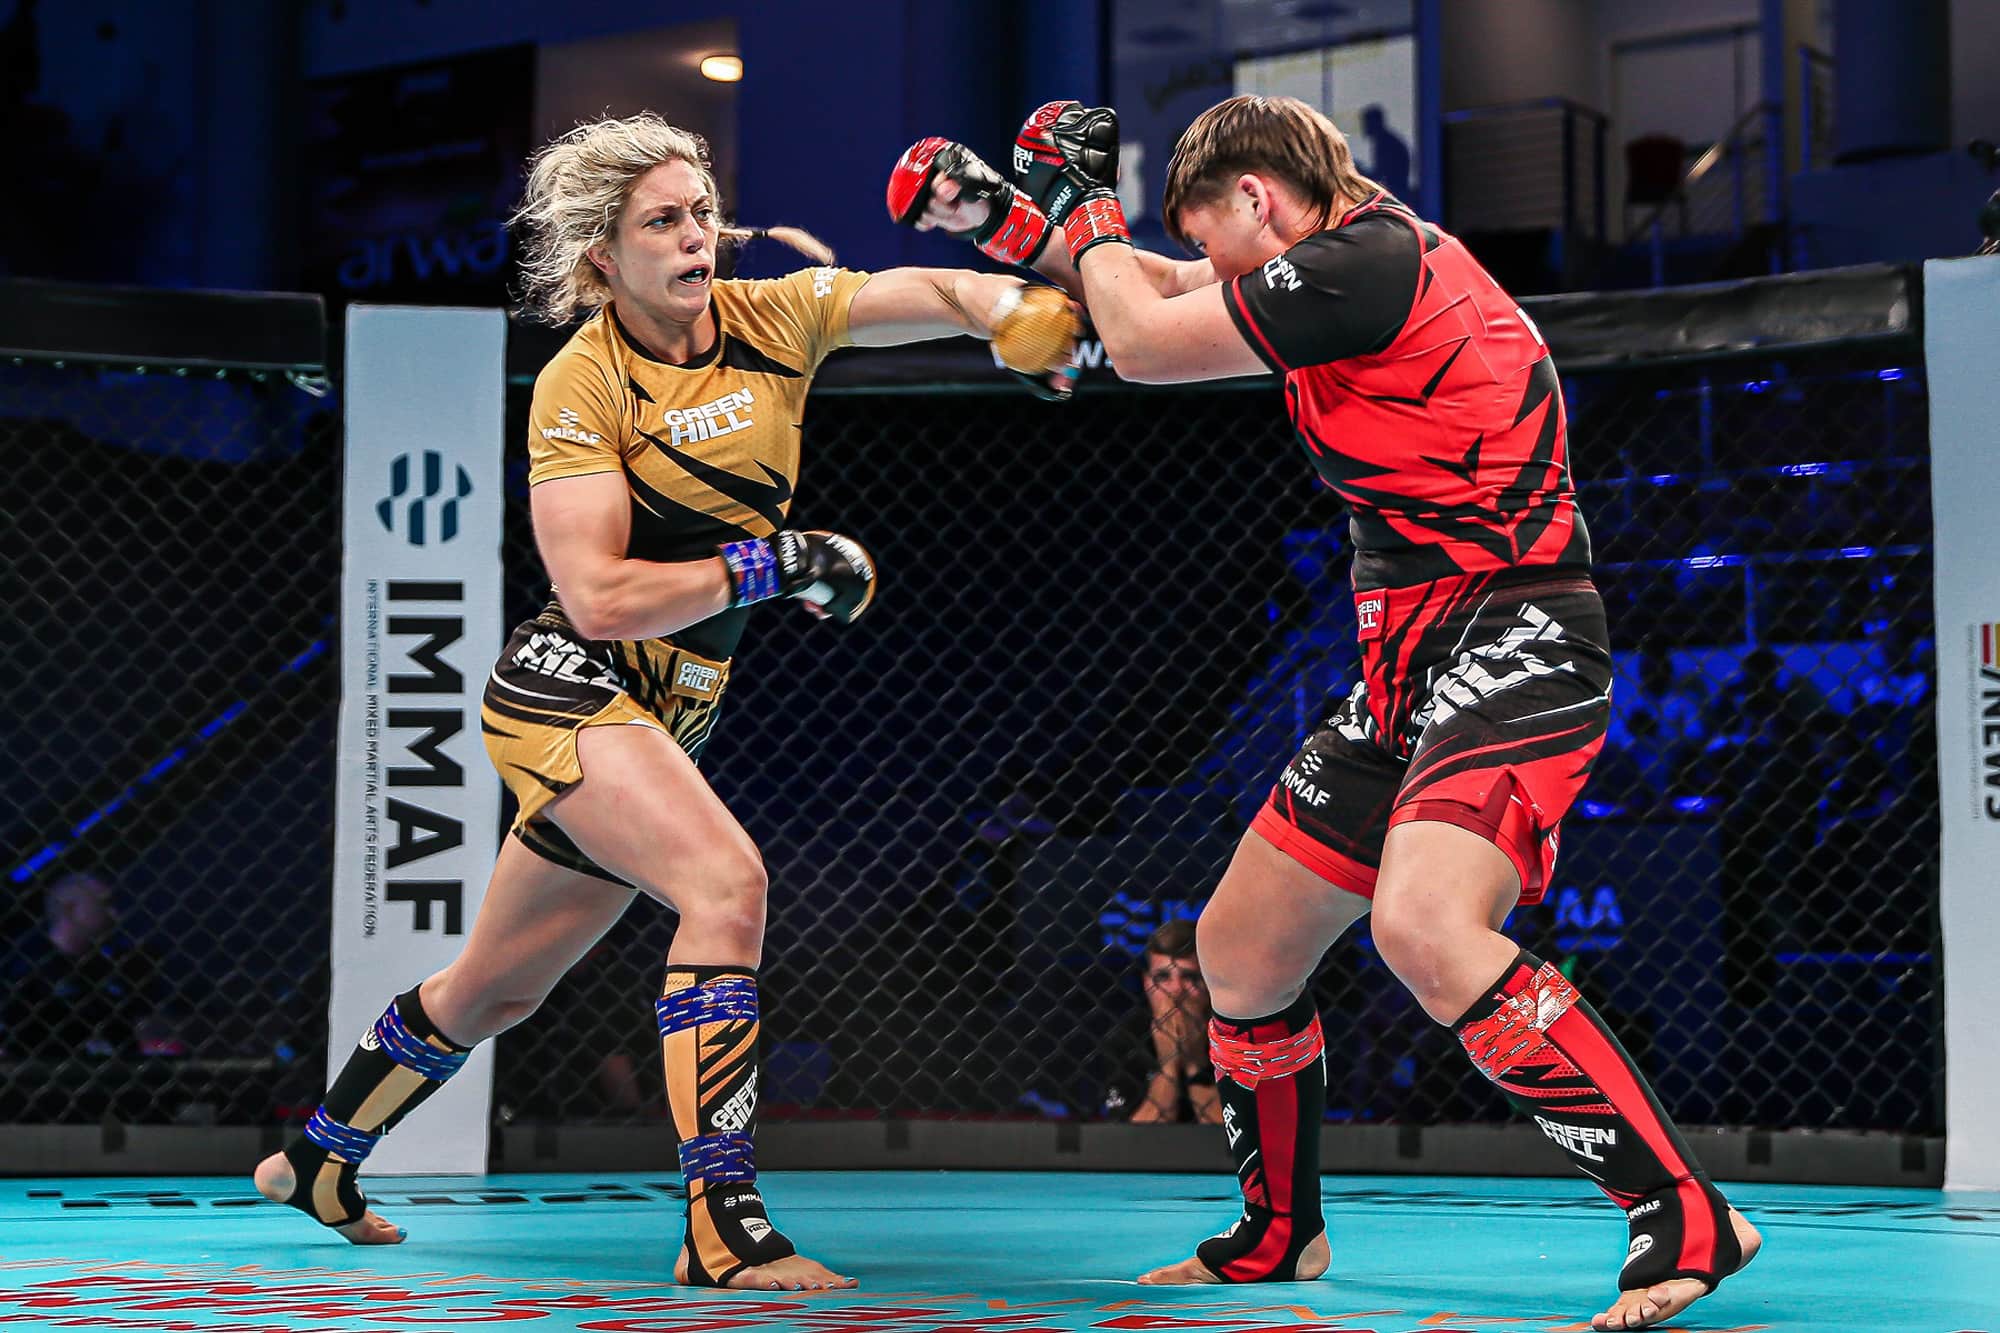 2019 IMMAF Worlds Matches Free-to-view At IMMAF TV